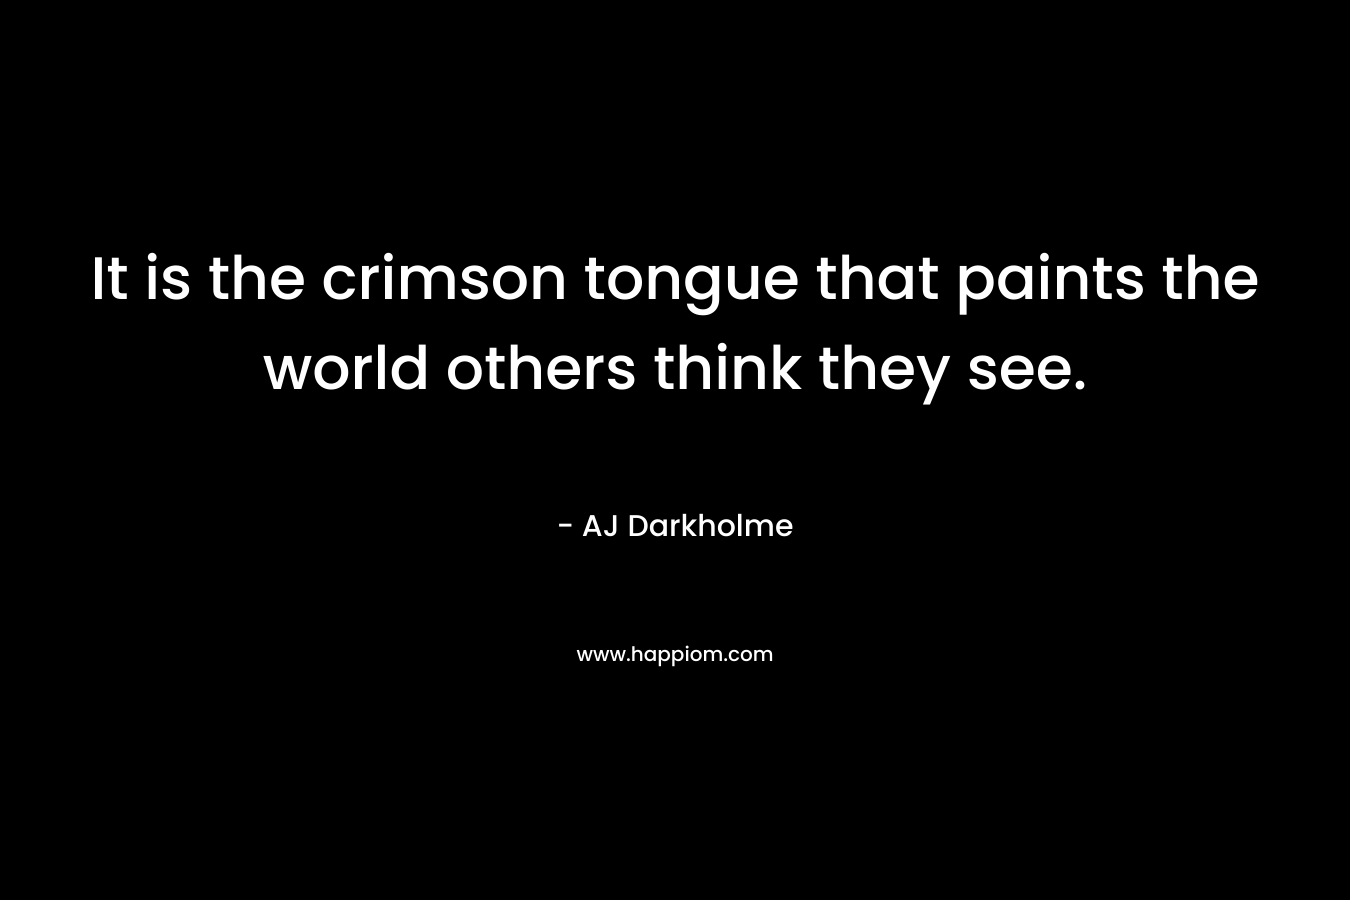 It is the crimson tongue that paints the world others think they see. – AJ Darkholme